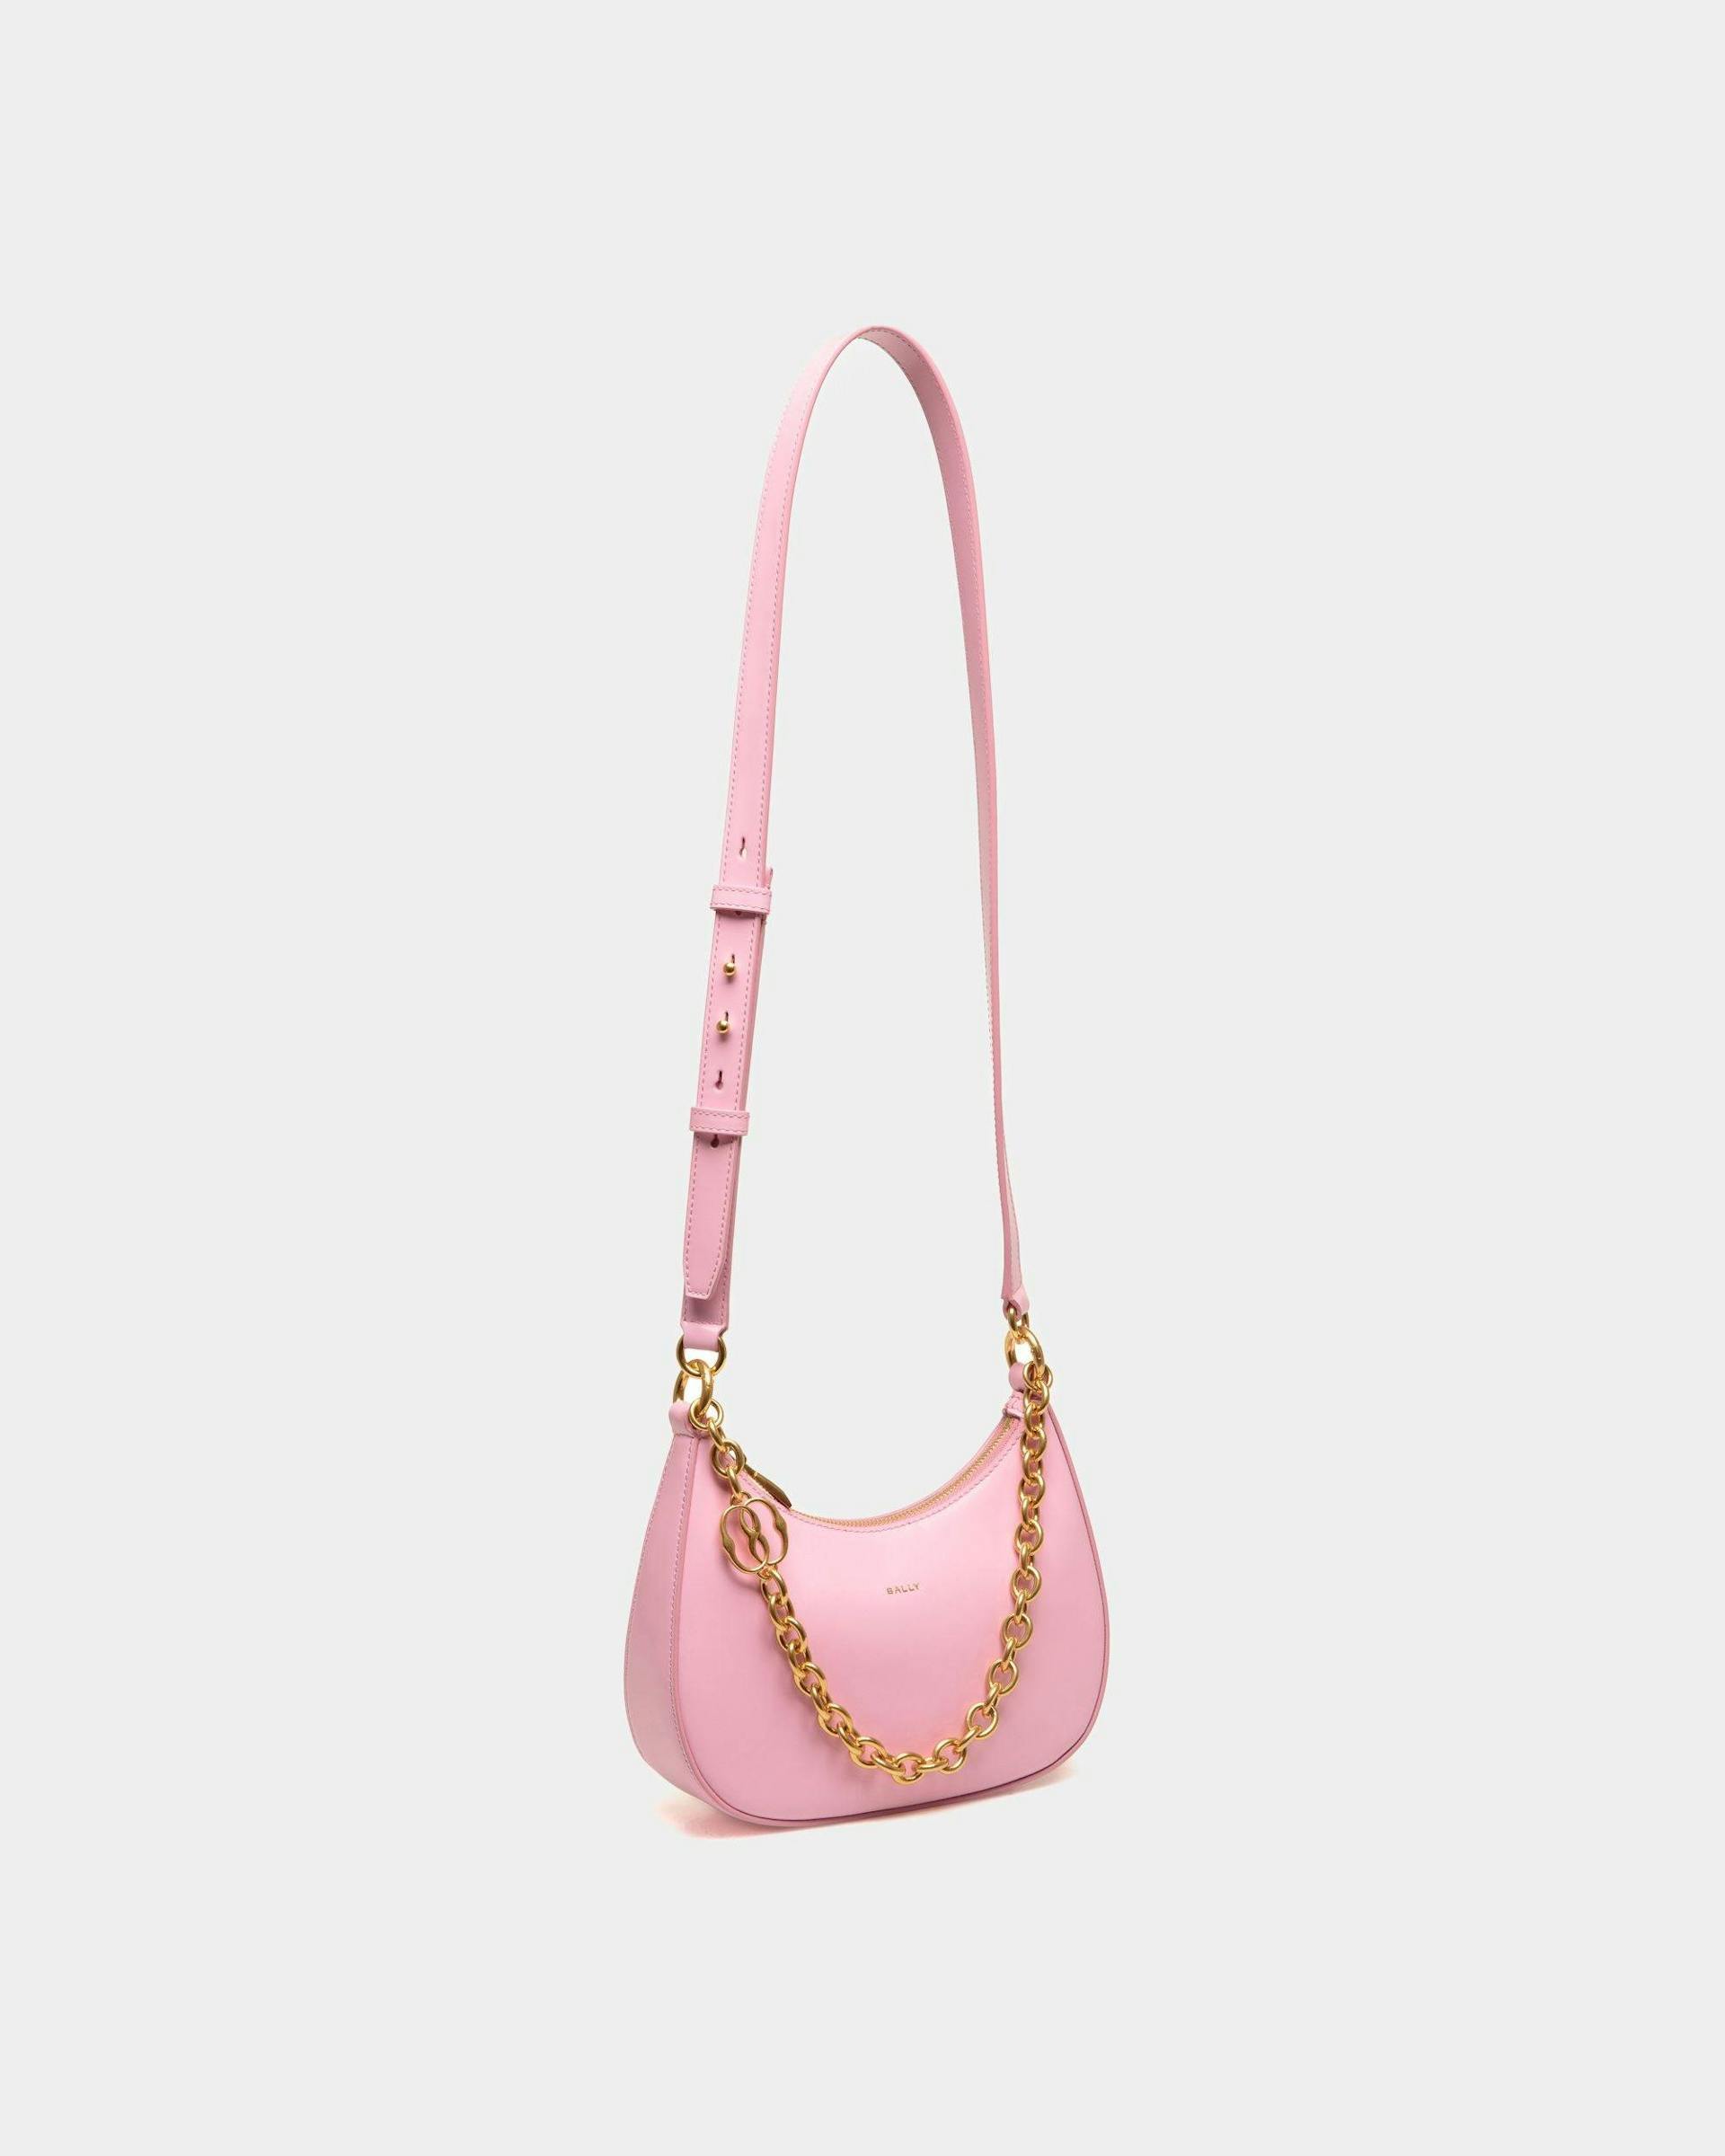 Women's Emblem Mini Crossbody Bag in Pink Patent Leather | Bally | Still Life 3/4 Front